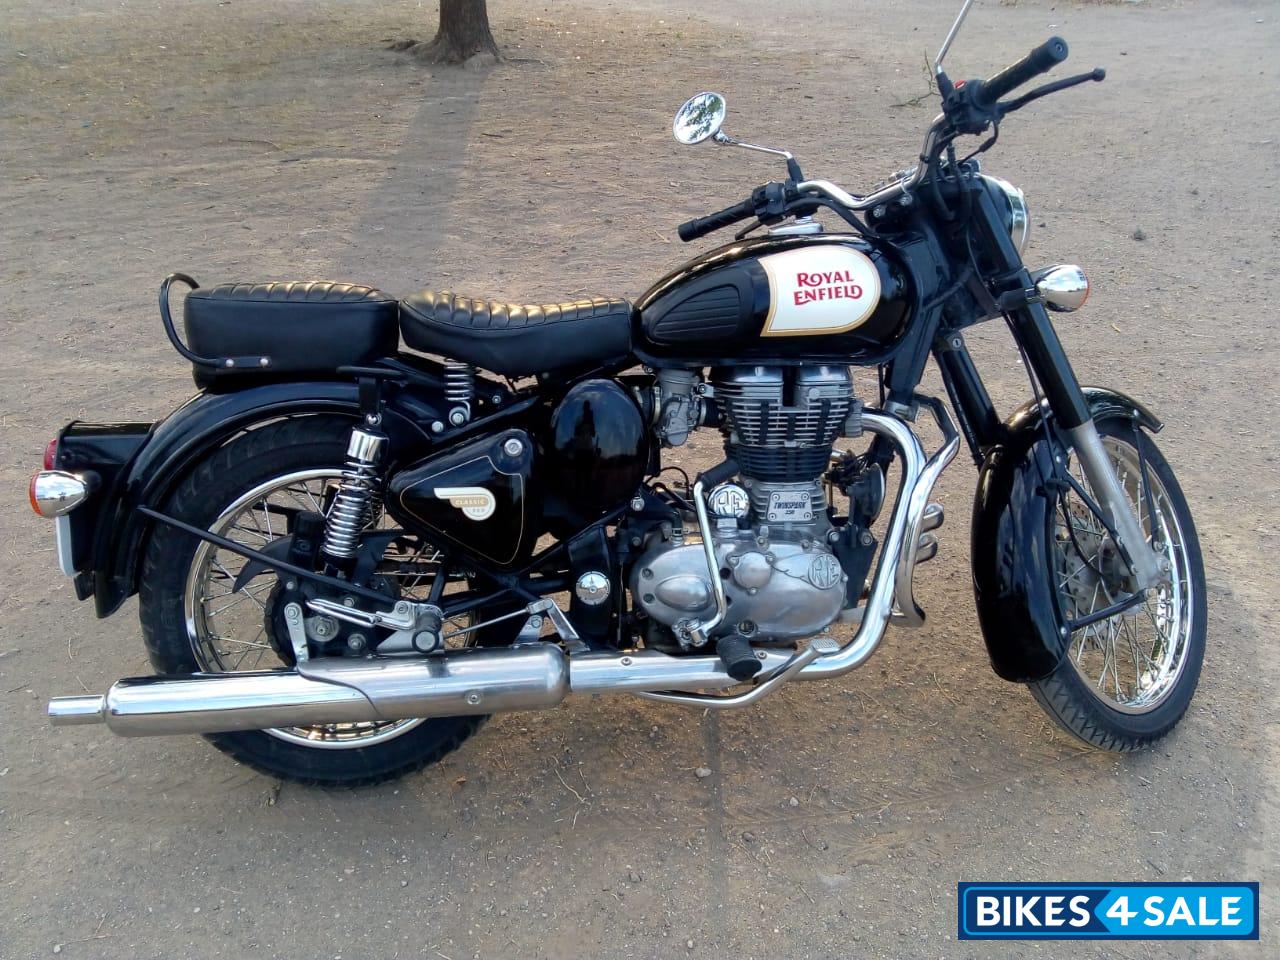 Used 2016 model Royal Enfield Classic 350 for sale in Aurangabad. ID ...